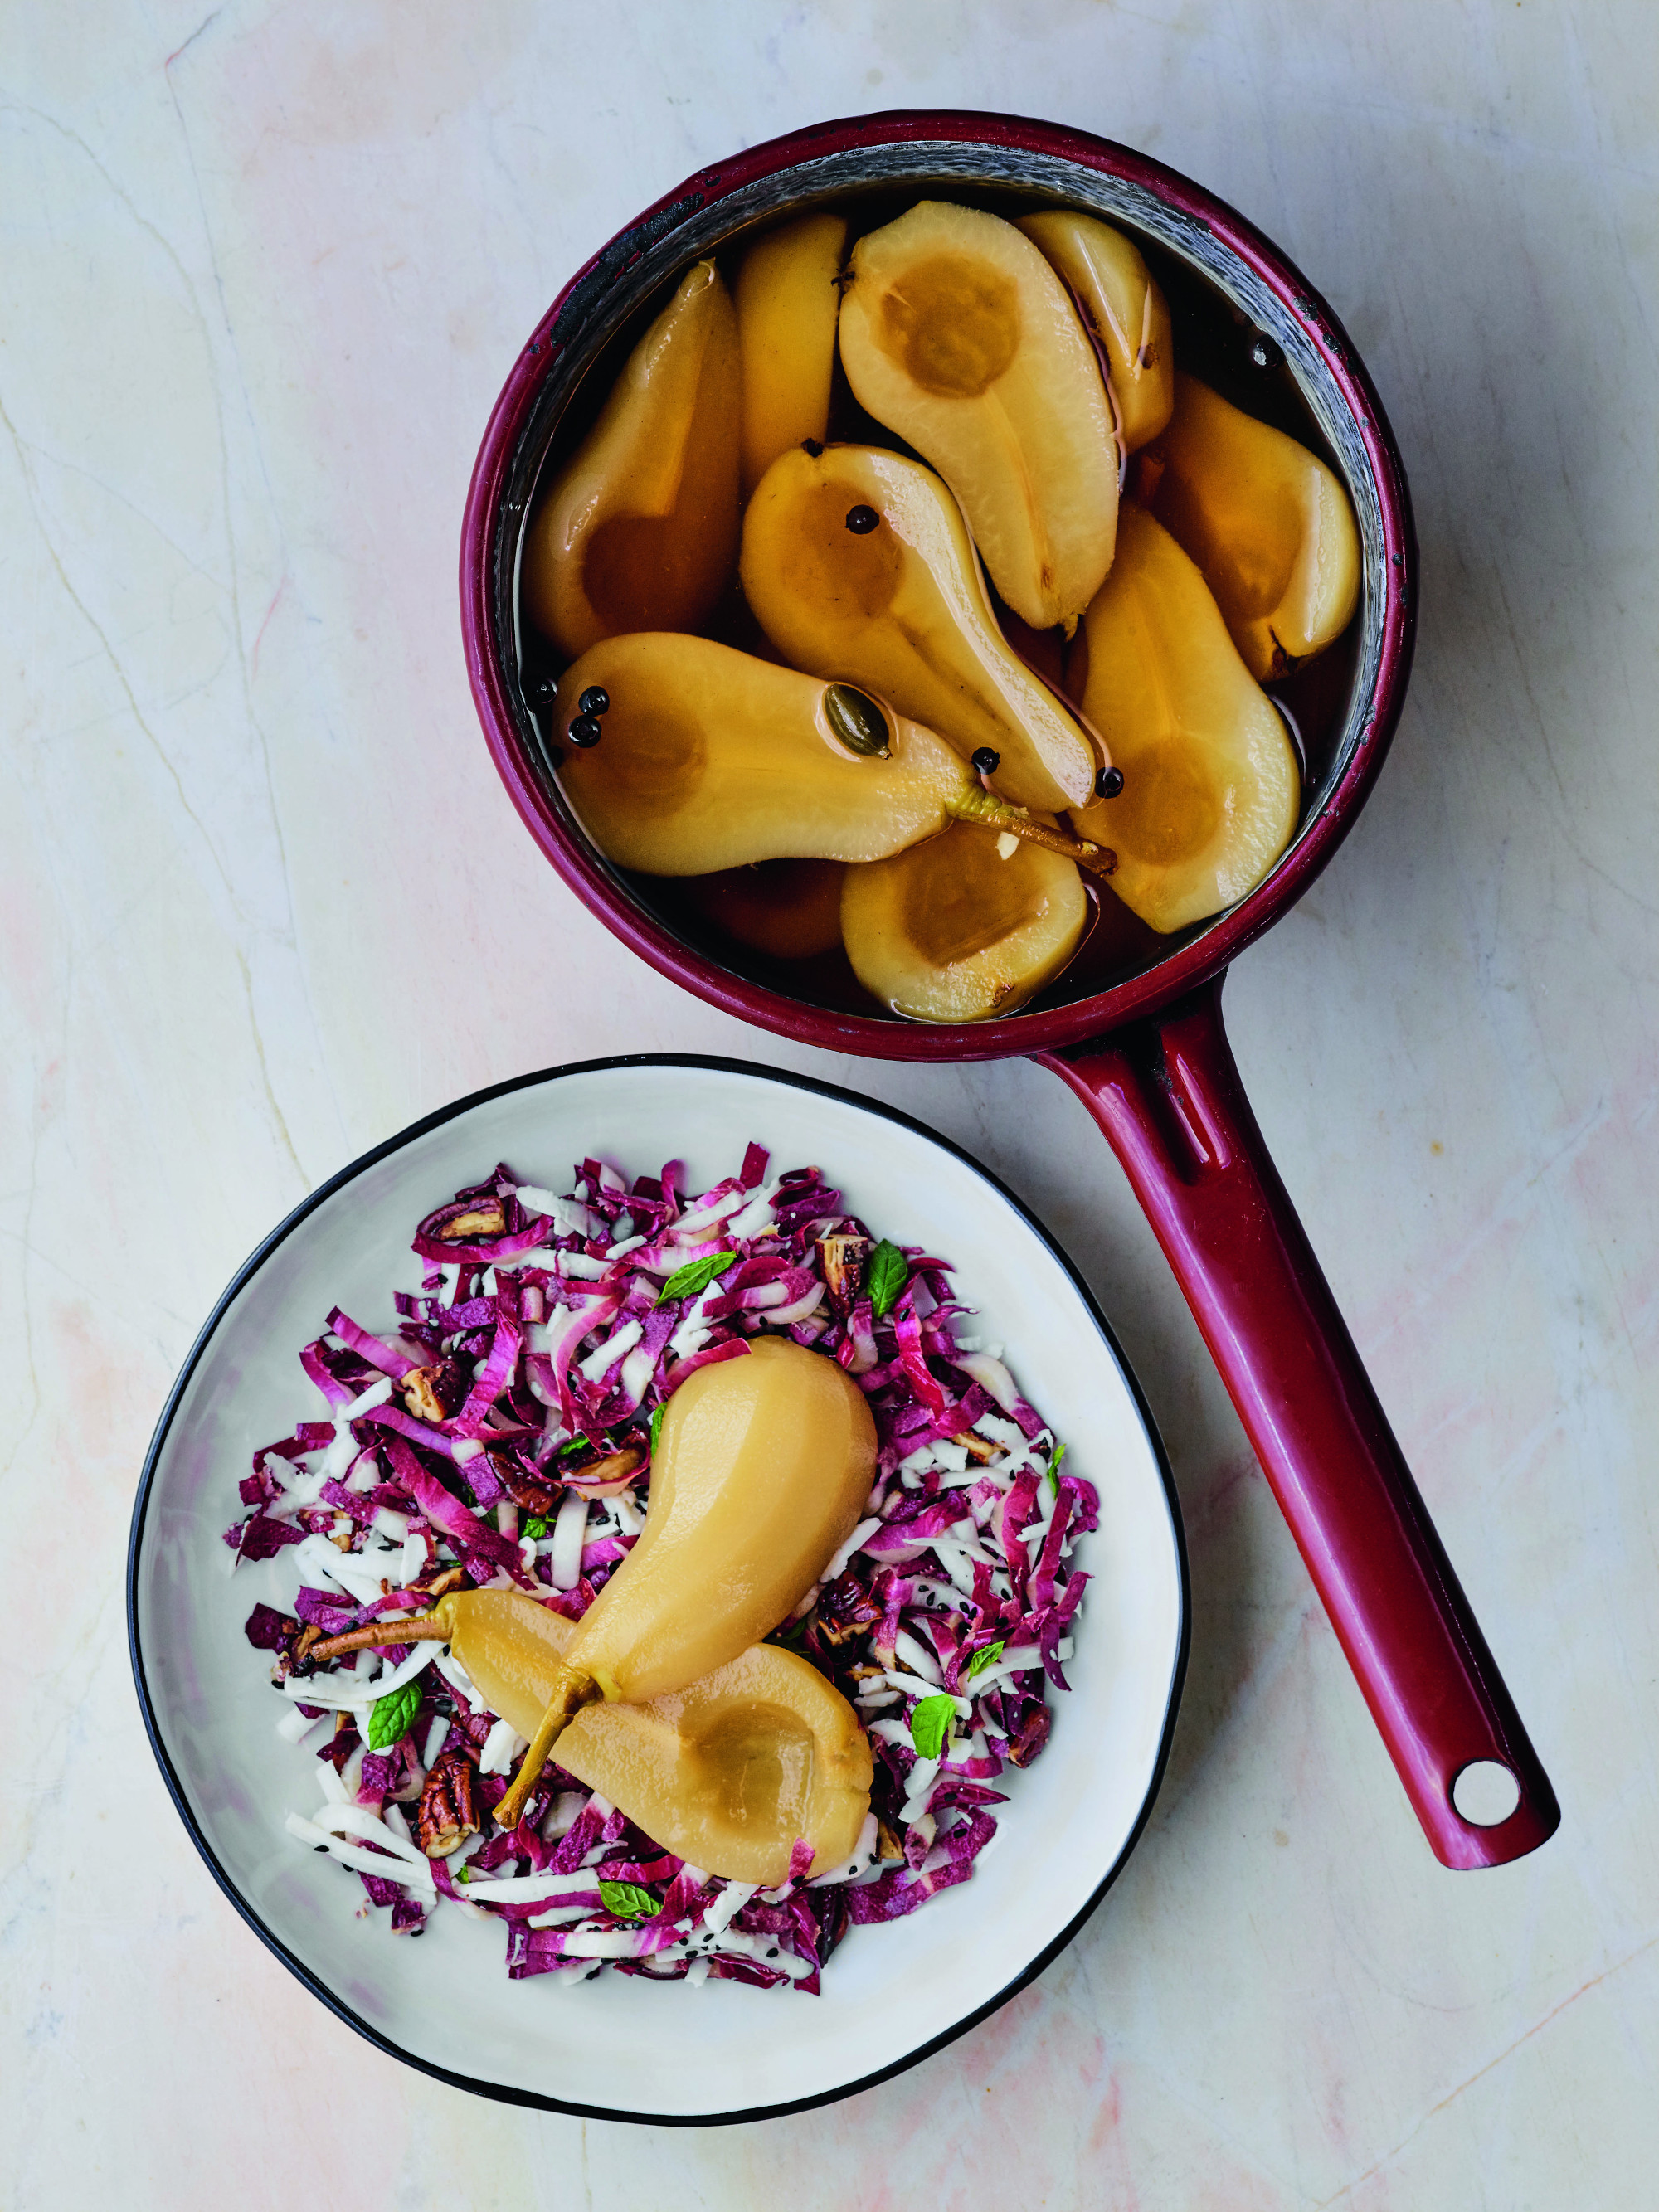 Baharat Poached Pear with Radicchio White Cheese Slaw and Candied Pecans. Photography by Dan Perez